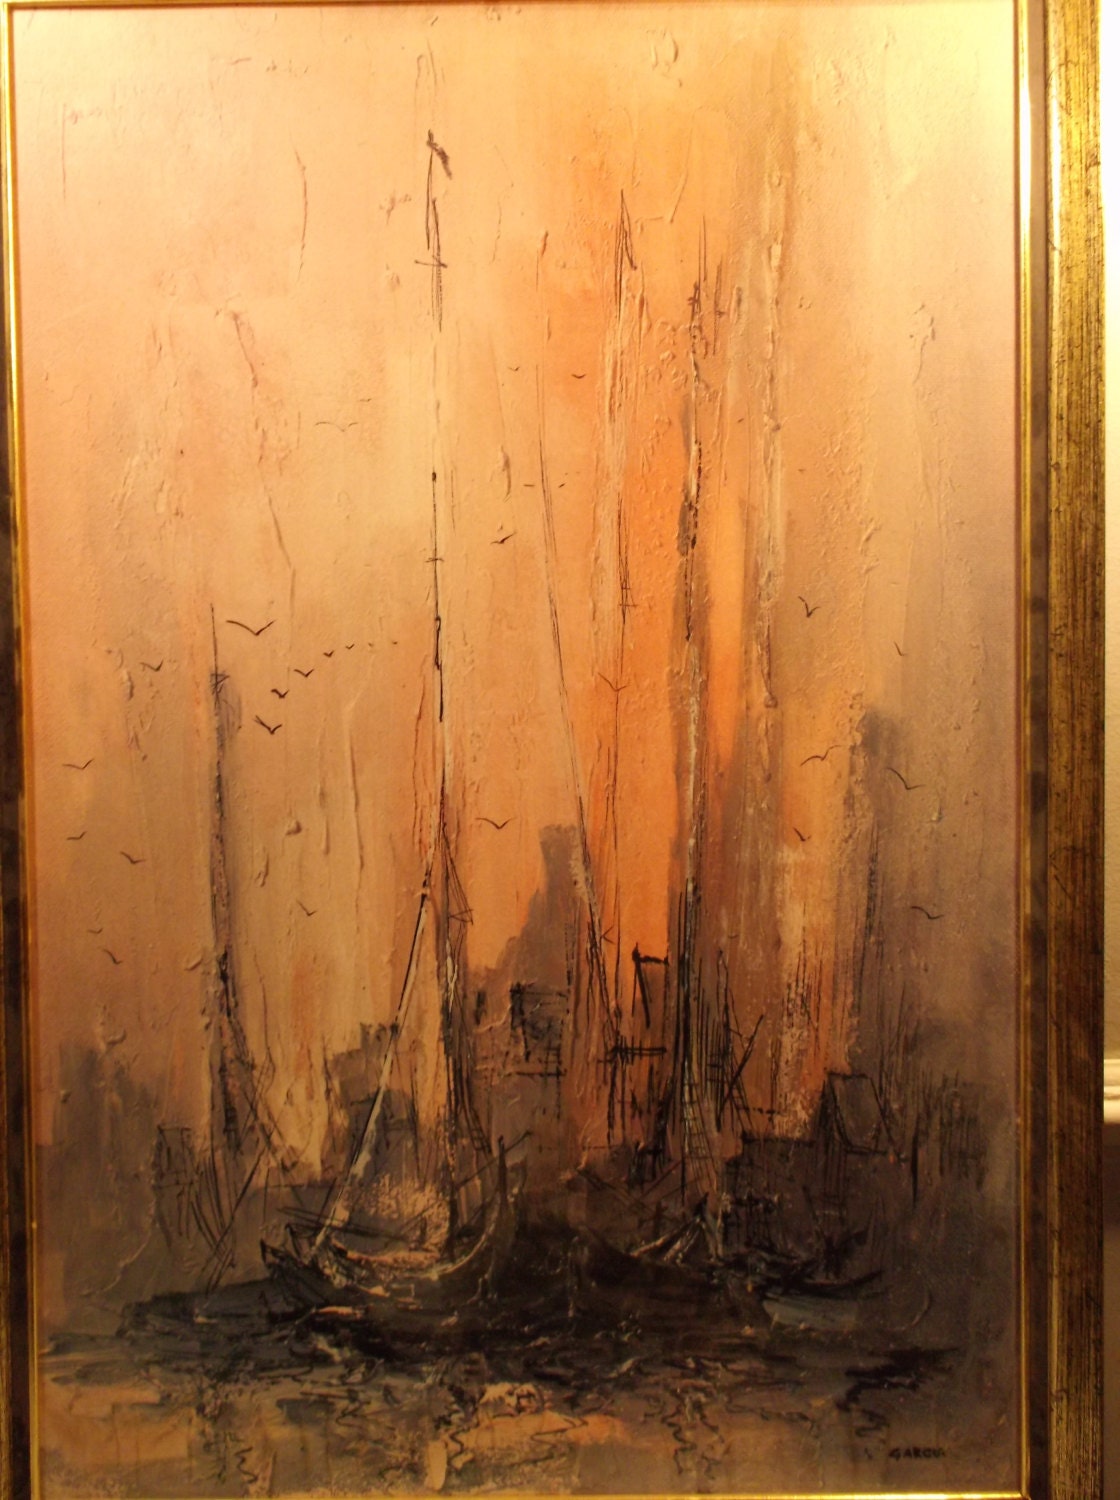 Danny Garcia Oil Painting Tall Masts. Framed reproduction or1120 x 1500